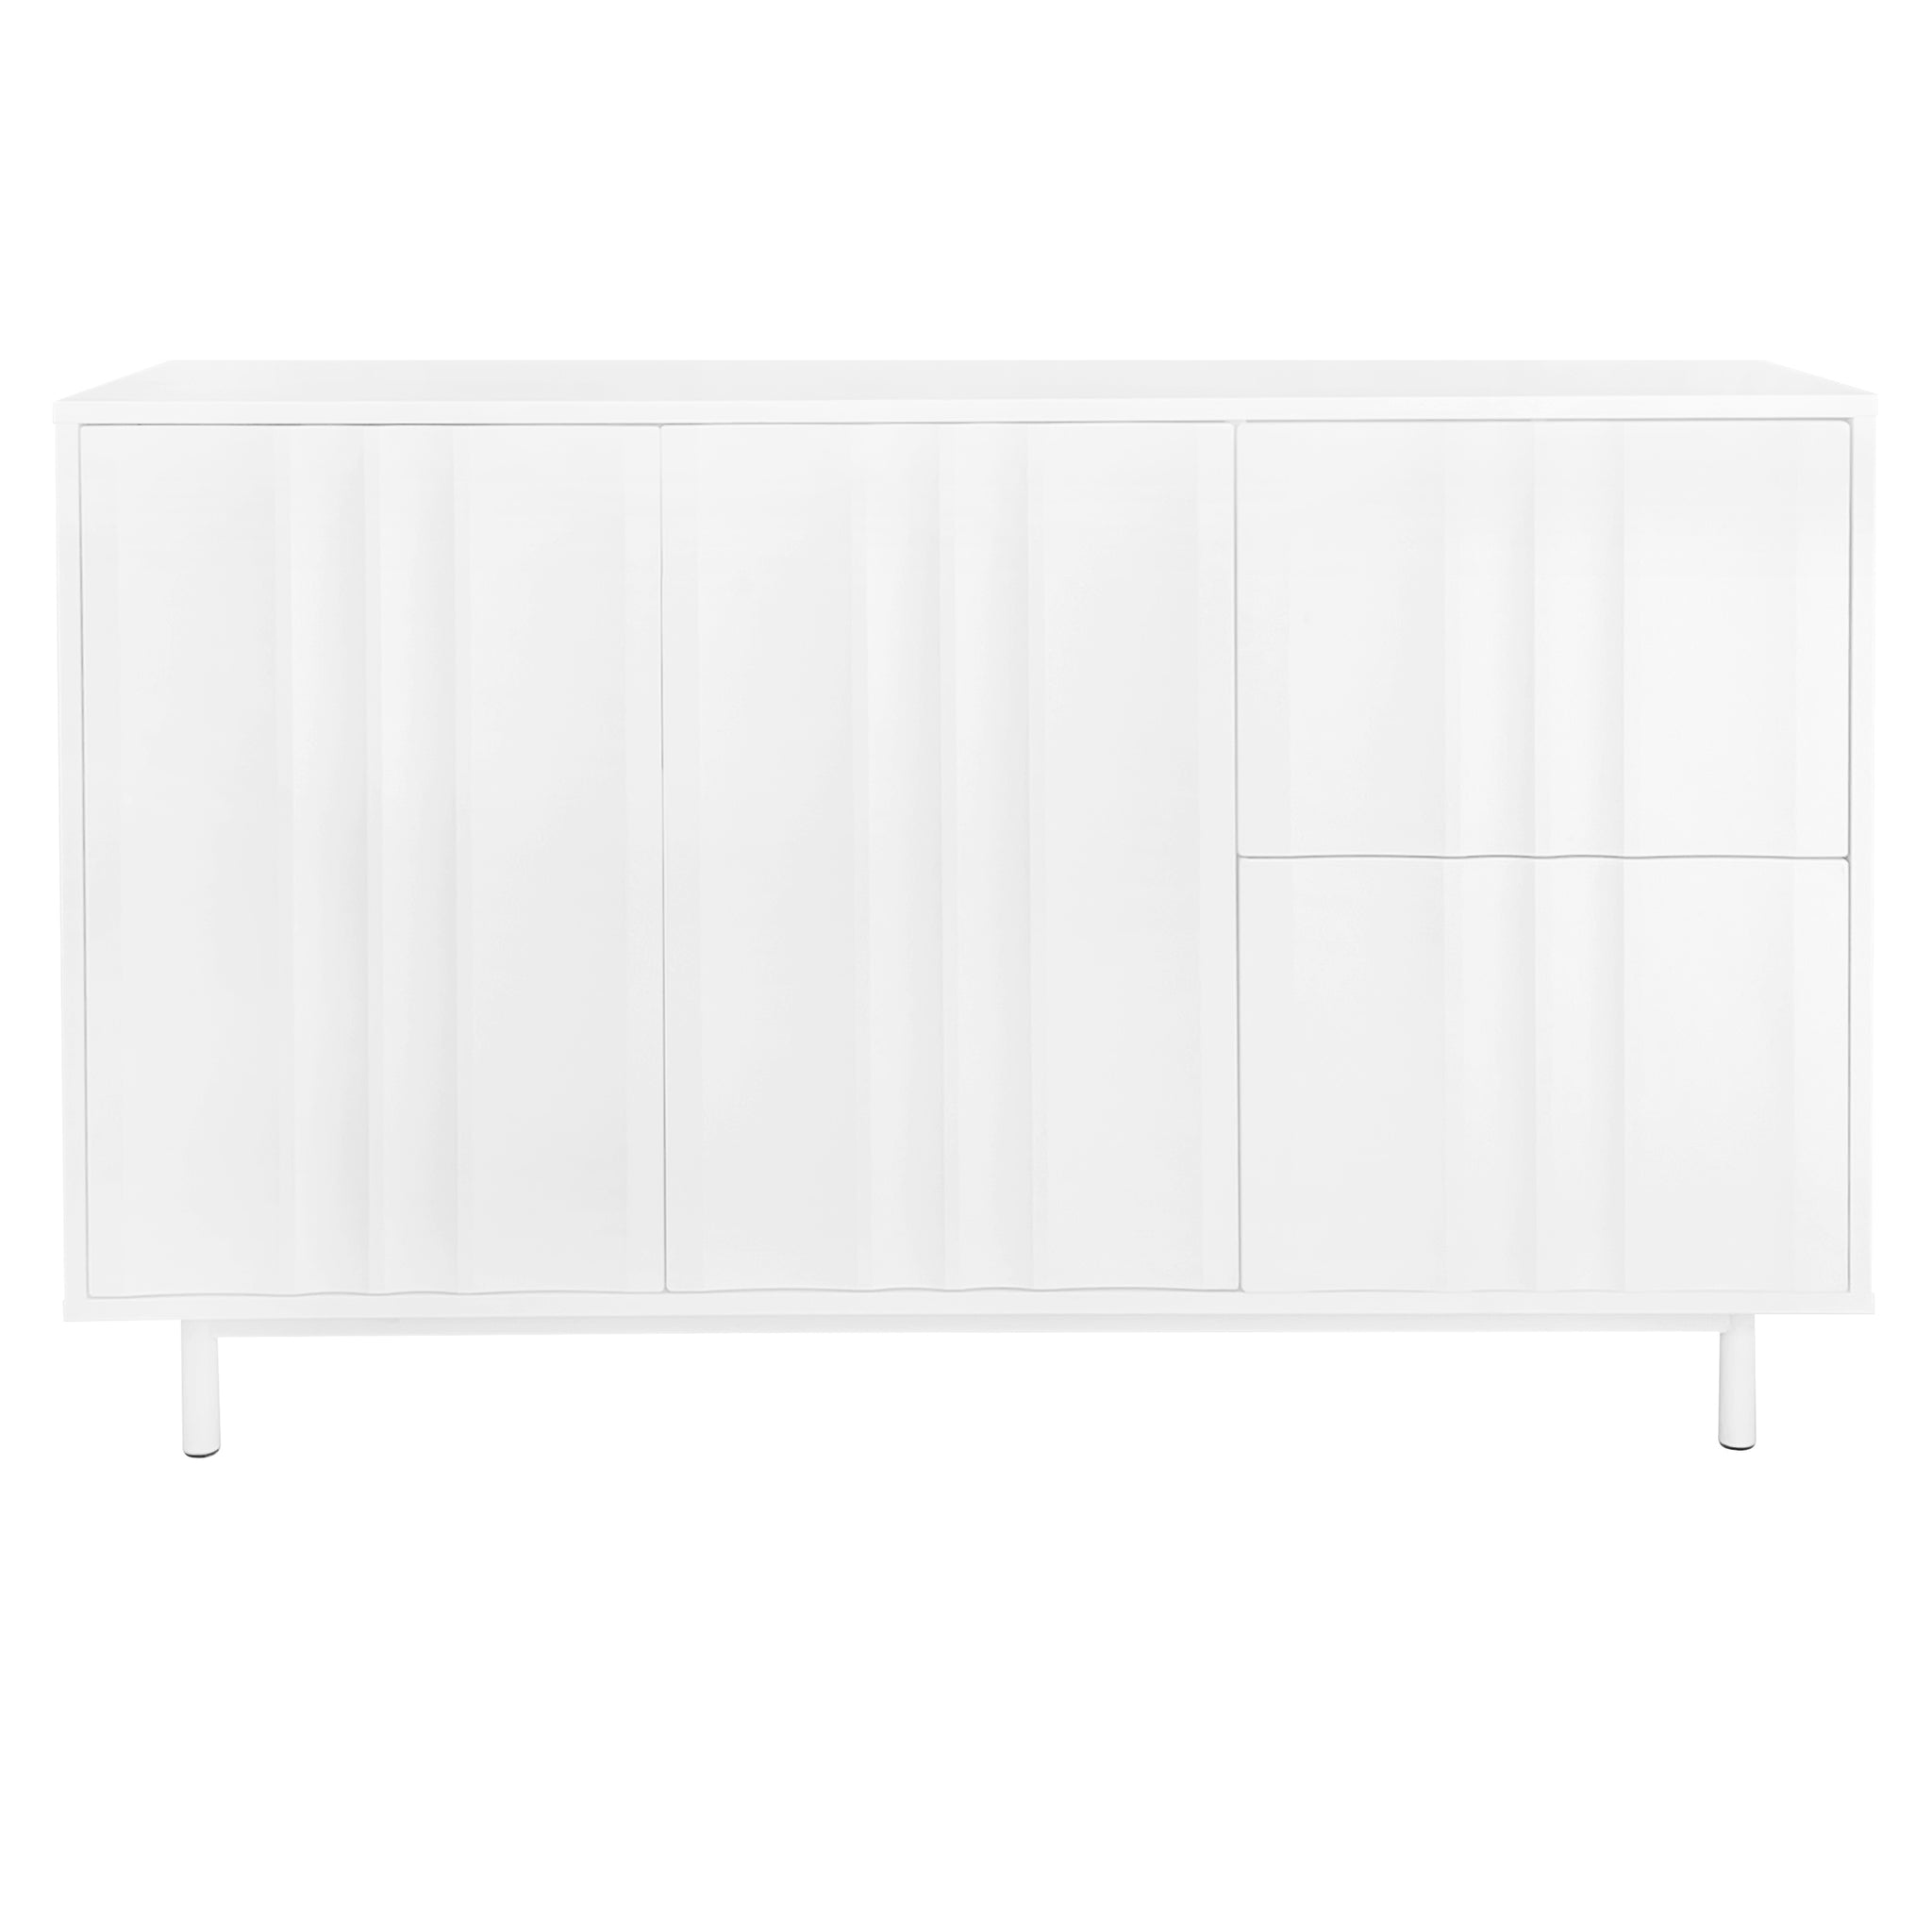 U STYLE Wave Pattern Storage Cabinet with 2 Doors and white-mdf